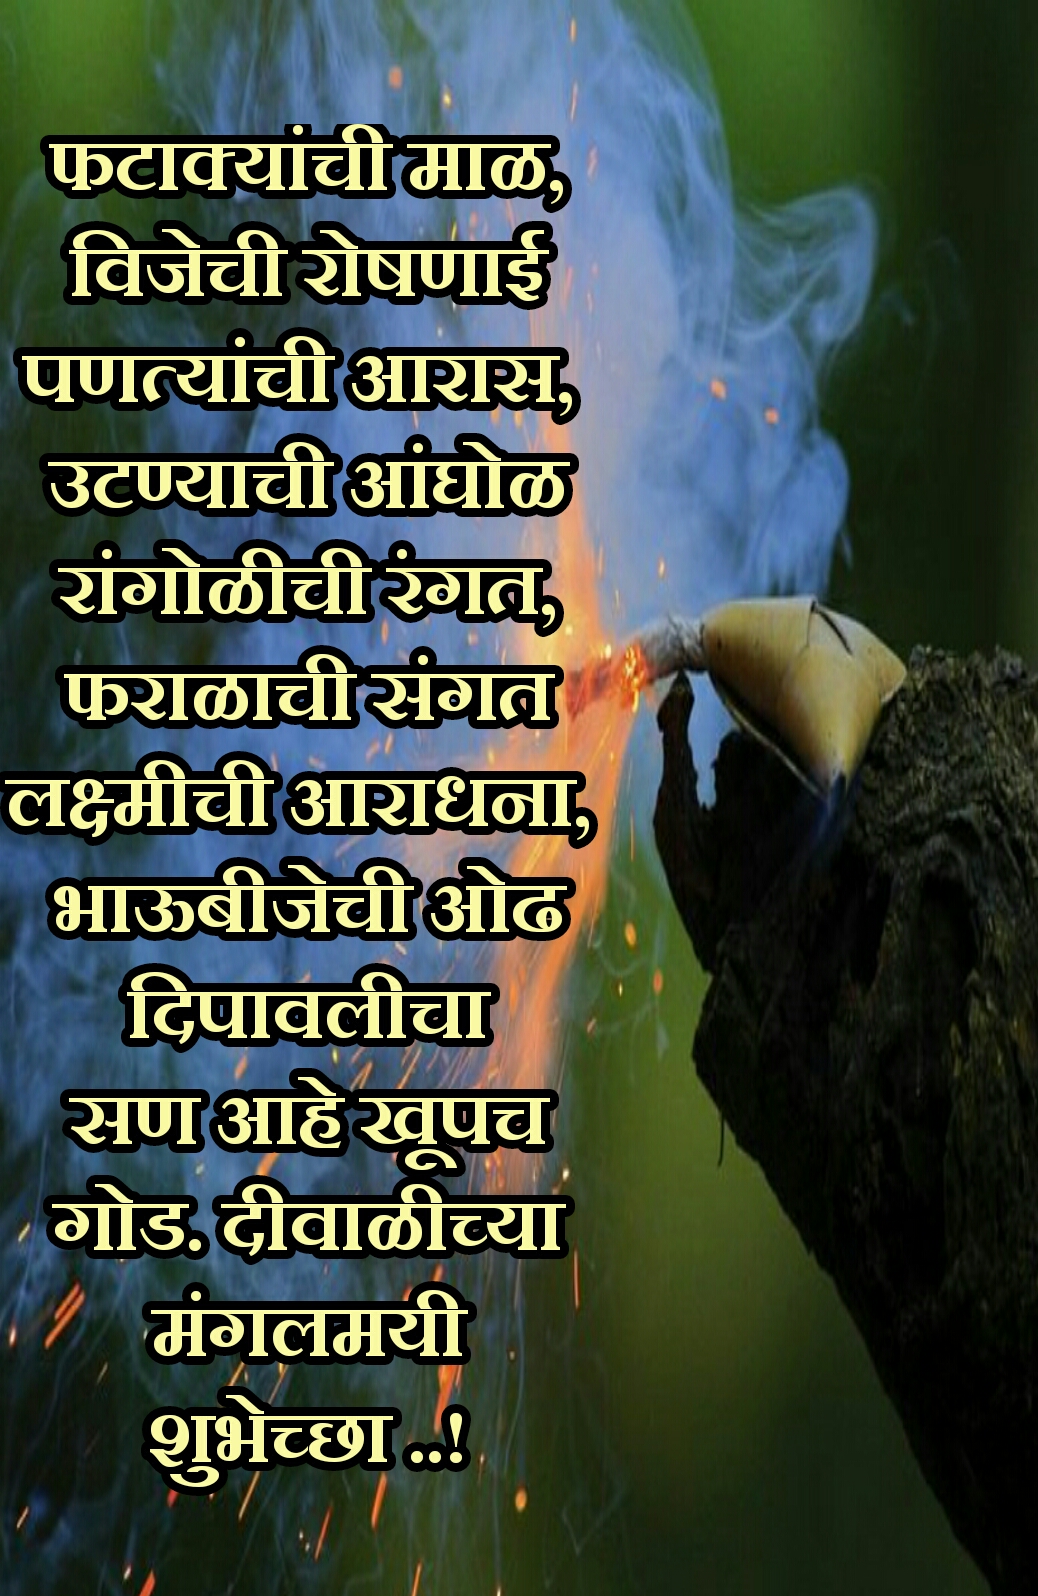 Happy Diwali Wishes in Marathi 2019 Greetings Images